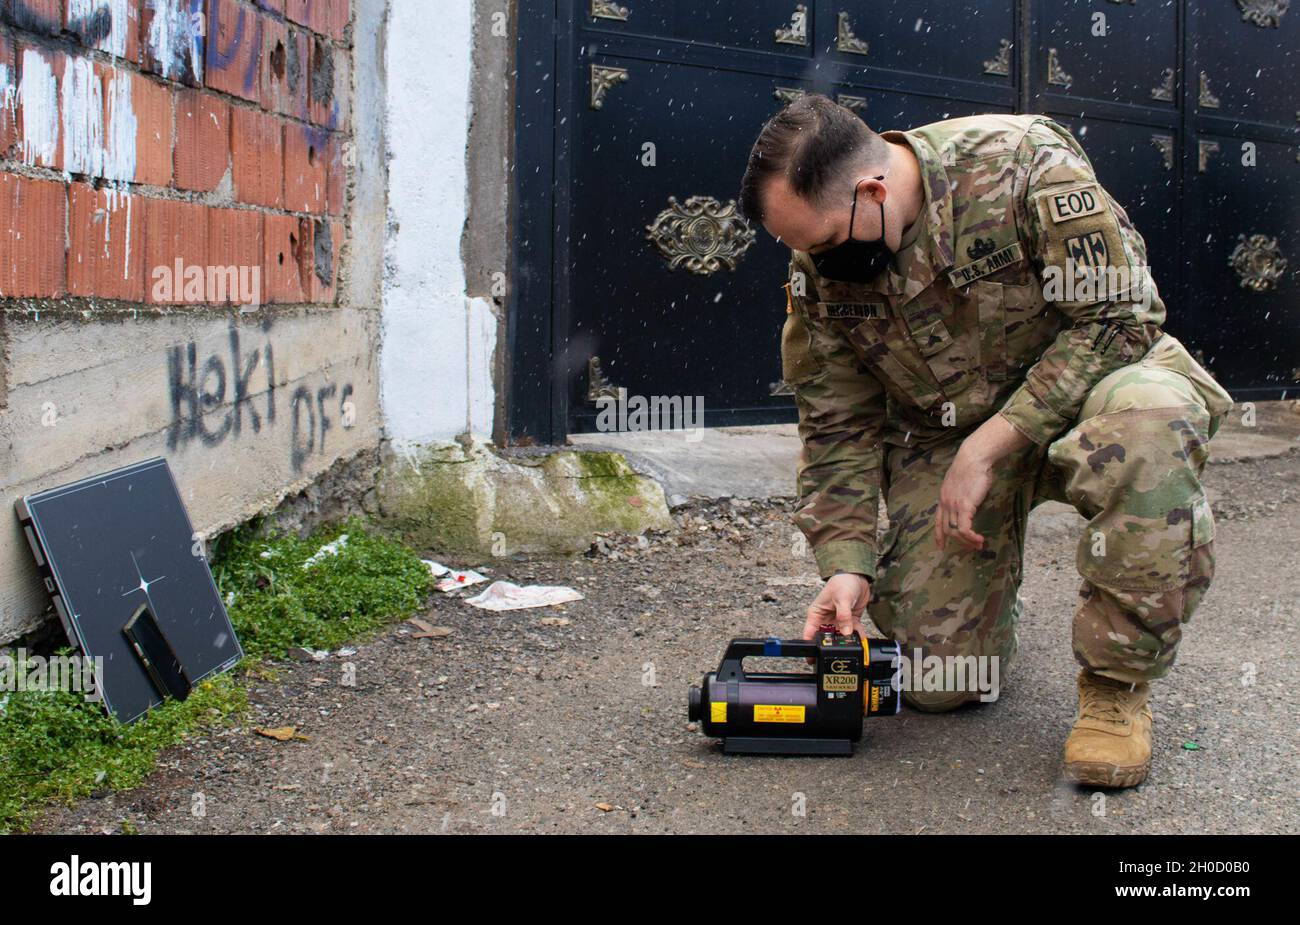 Sgt. Mark Henderson, a Soldier with the explosive ordnance disposal team attached to Regional Command-East, Kosovo Force, tests an X-ray system during an EOD emergency call in Gjilan/Gnjilane, Kosovo, on Jan. 27, 2021. Henderson used the X-ray to determine if the explosive ordnance was safe to be moved. The 702nd Ordnance Company, based out of Grafenwoehr, Germany, is supporting the NATO-led KFOR mission, which is dedicated to creating a safe and secure environment for all people in Kosovo. Stock Photo